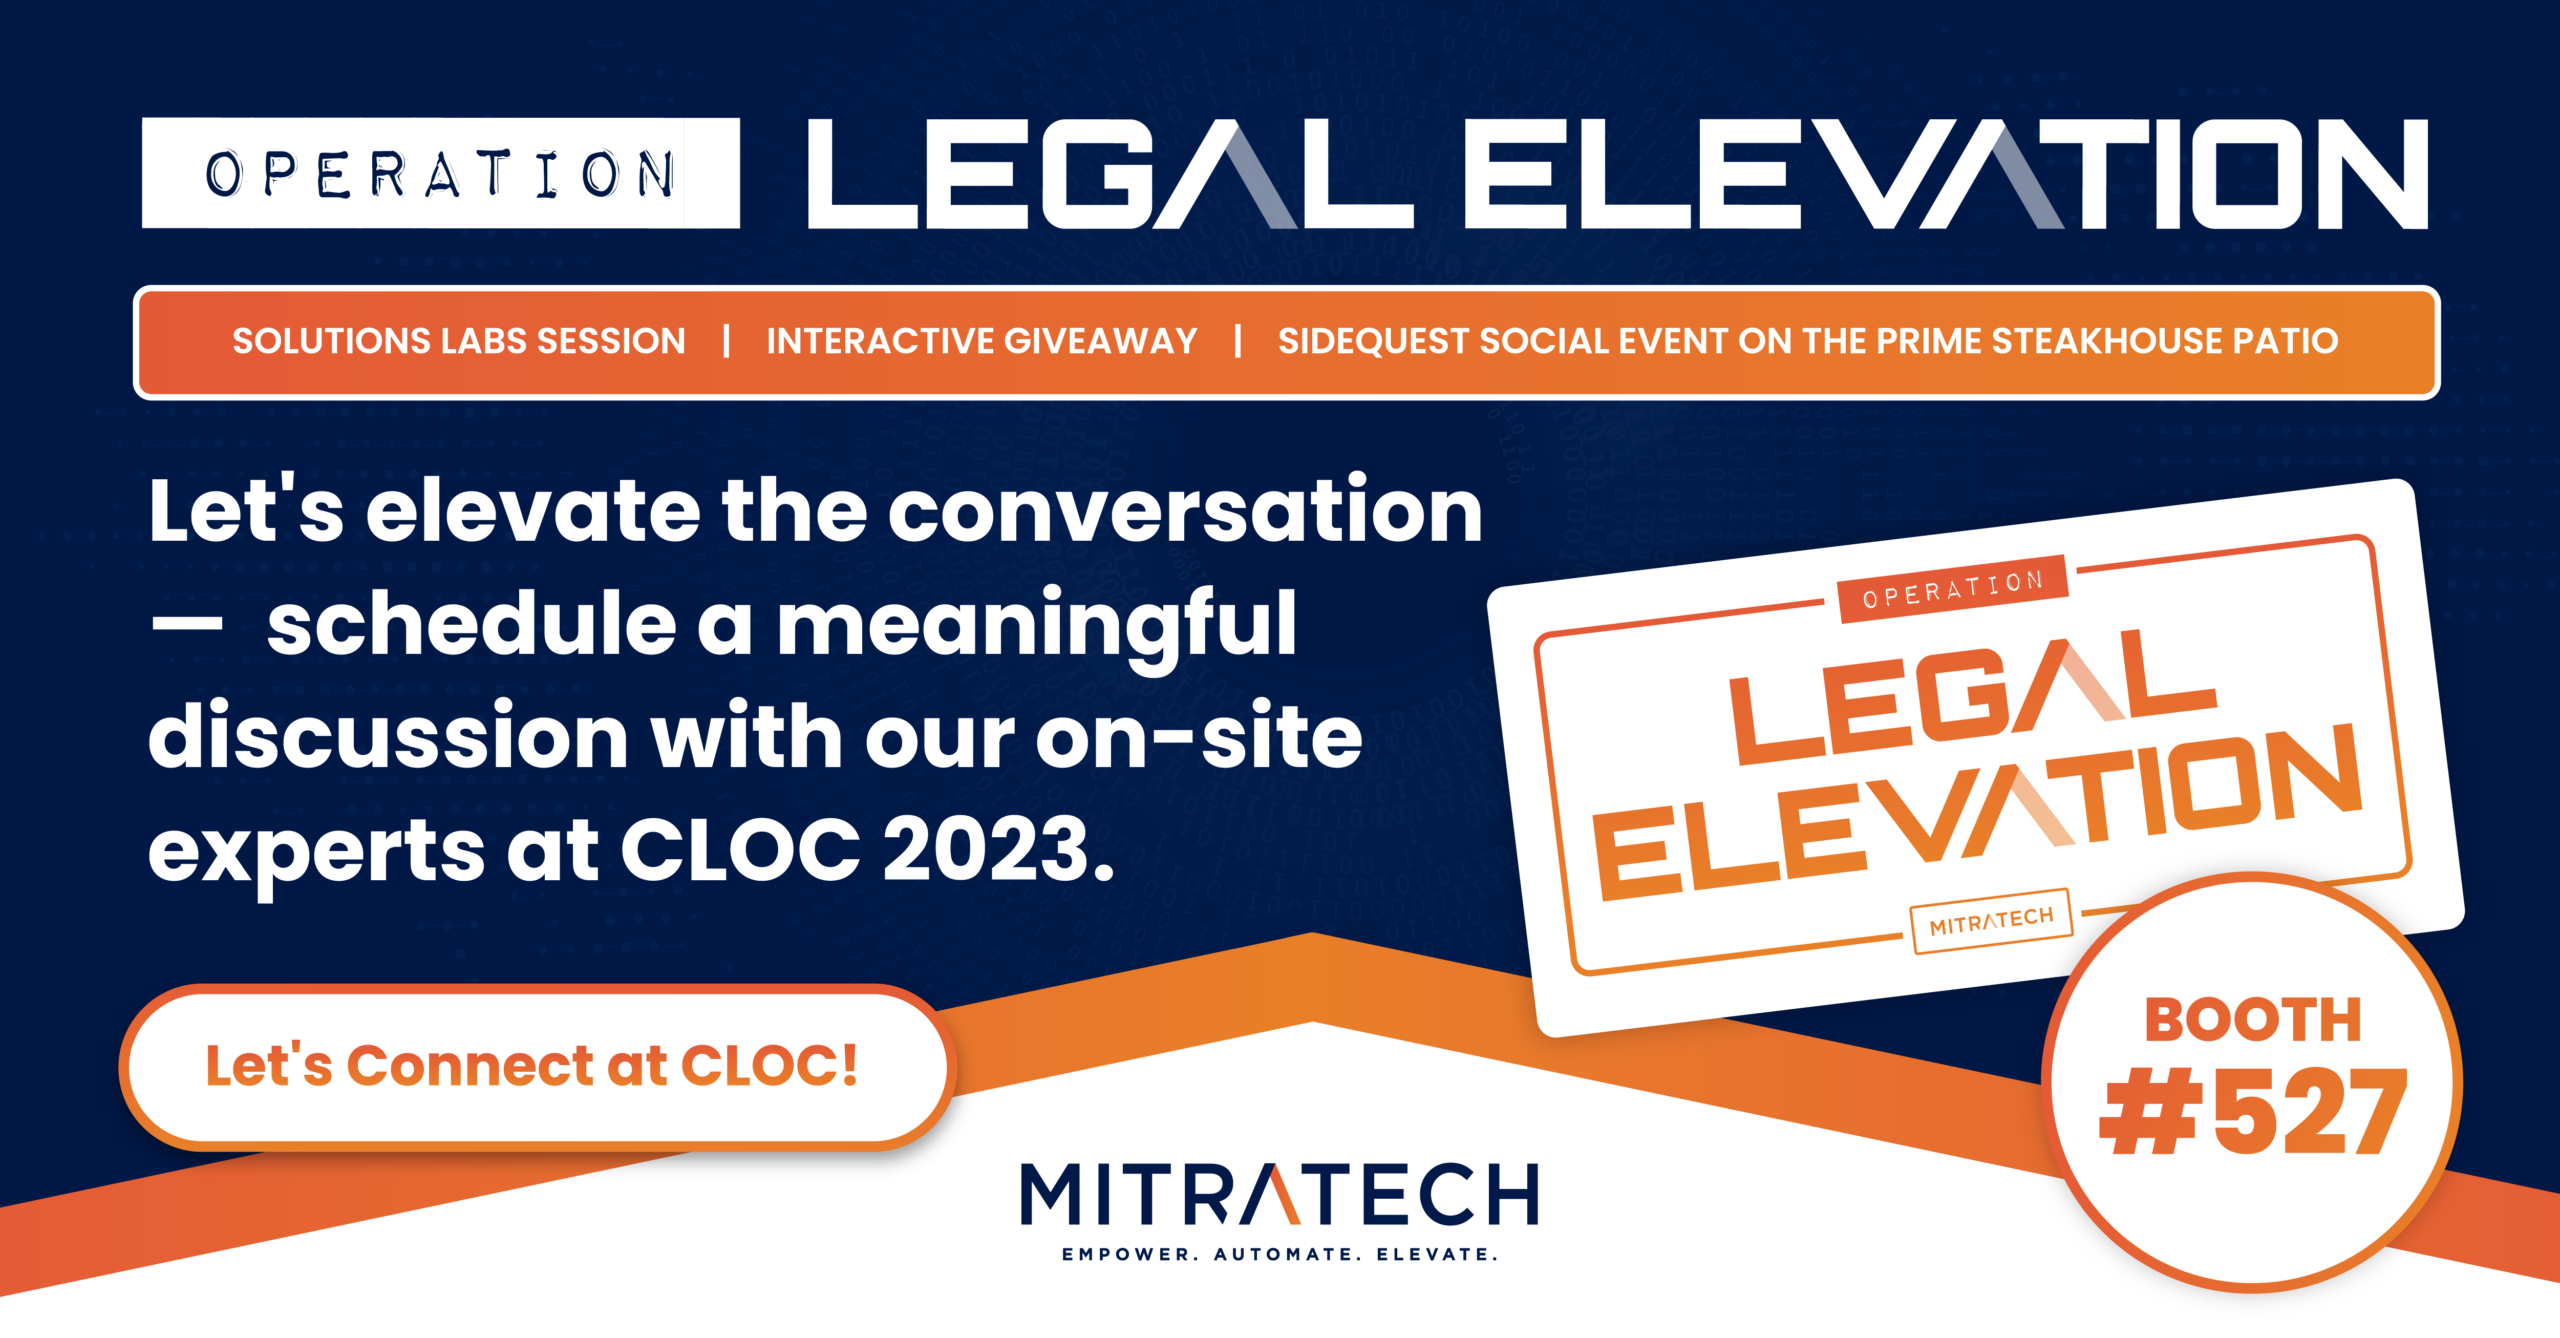 Connect with Mitratech at CLOC 2023